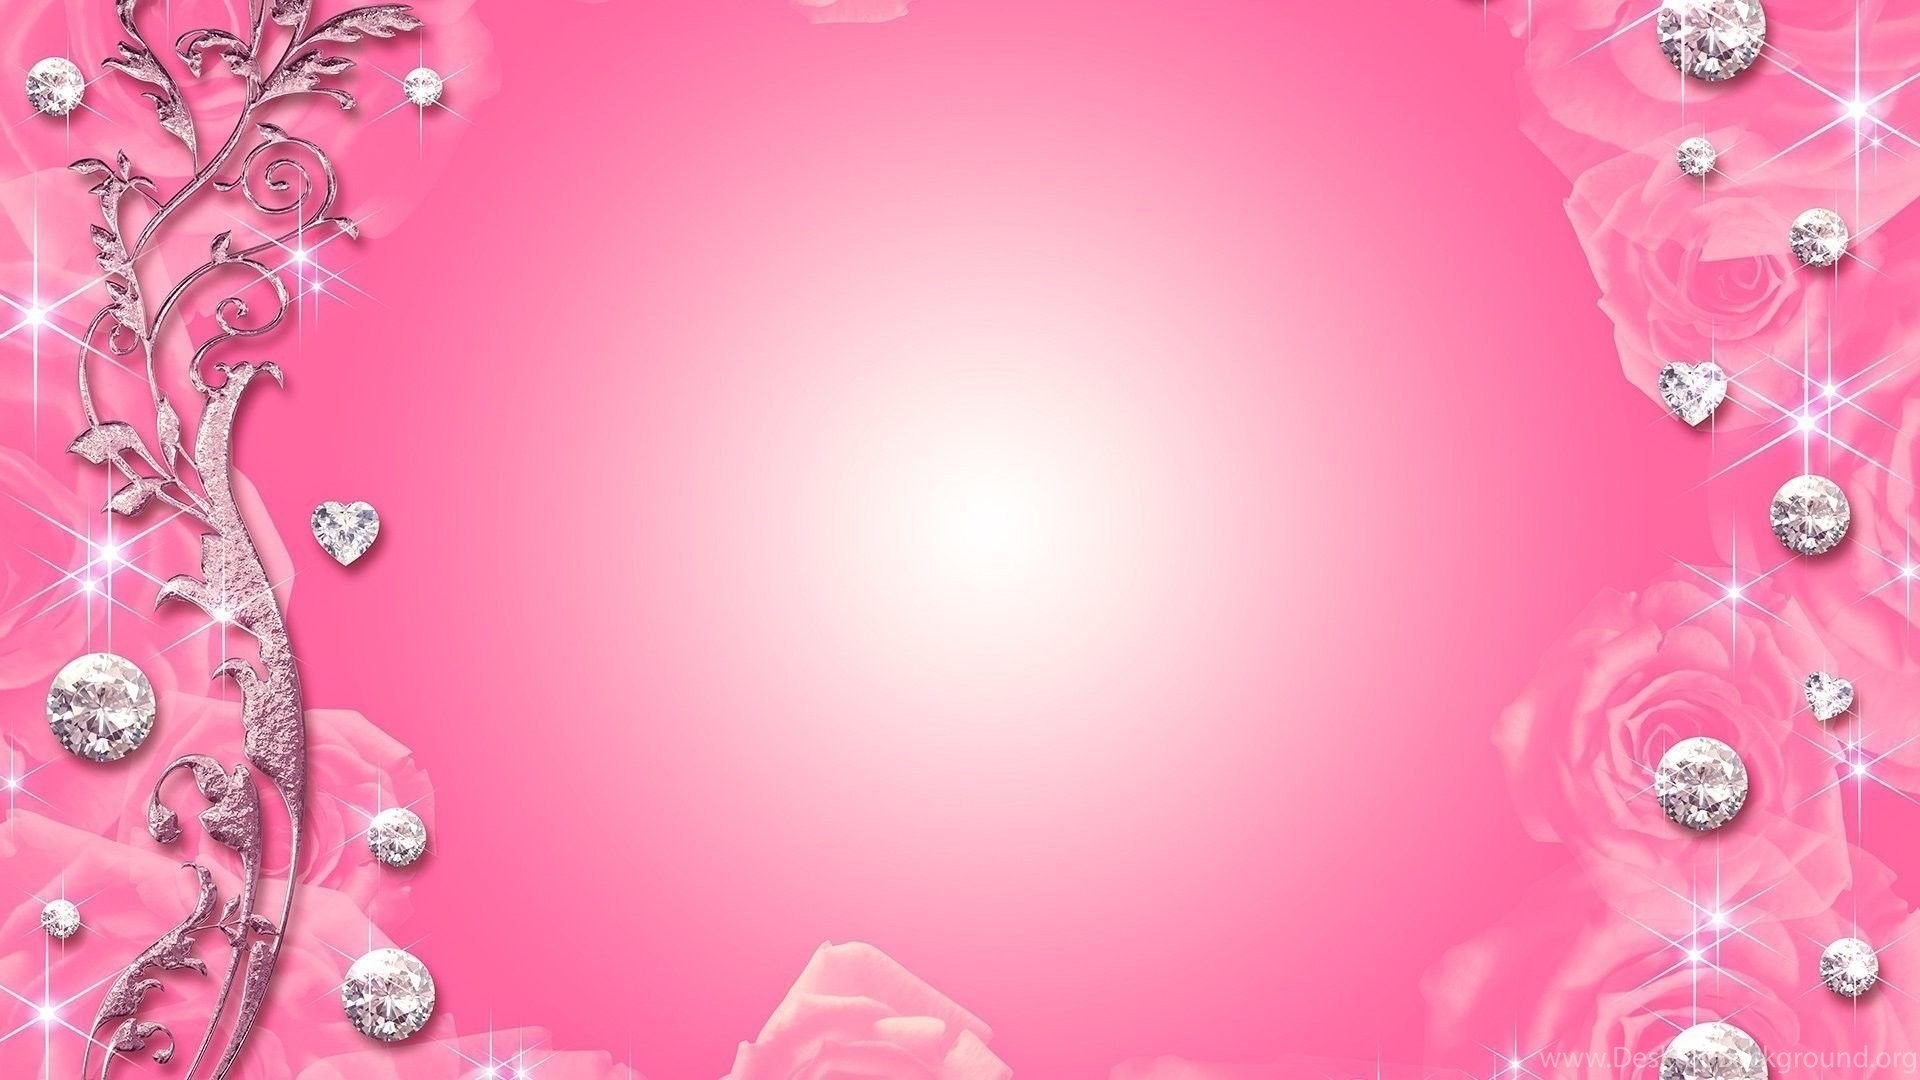 1920x1080 Love Pink Vs Wallpaper Images With HD Wallpapers Kemecer.com